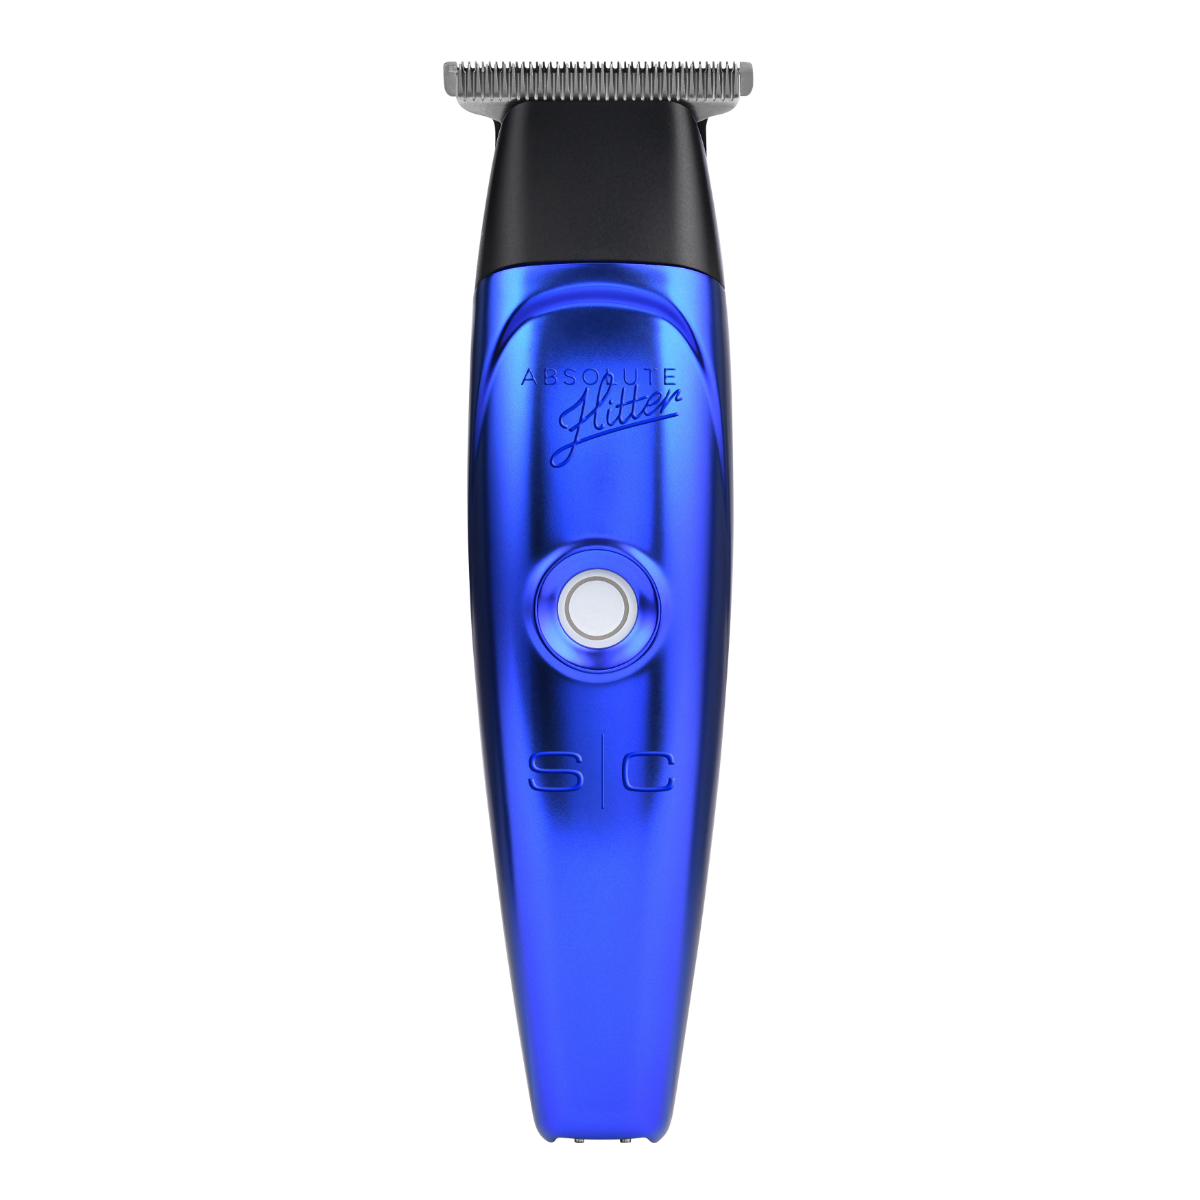 S|C Absolute Hitter Trimmer